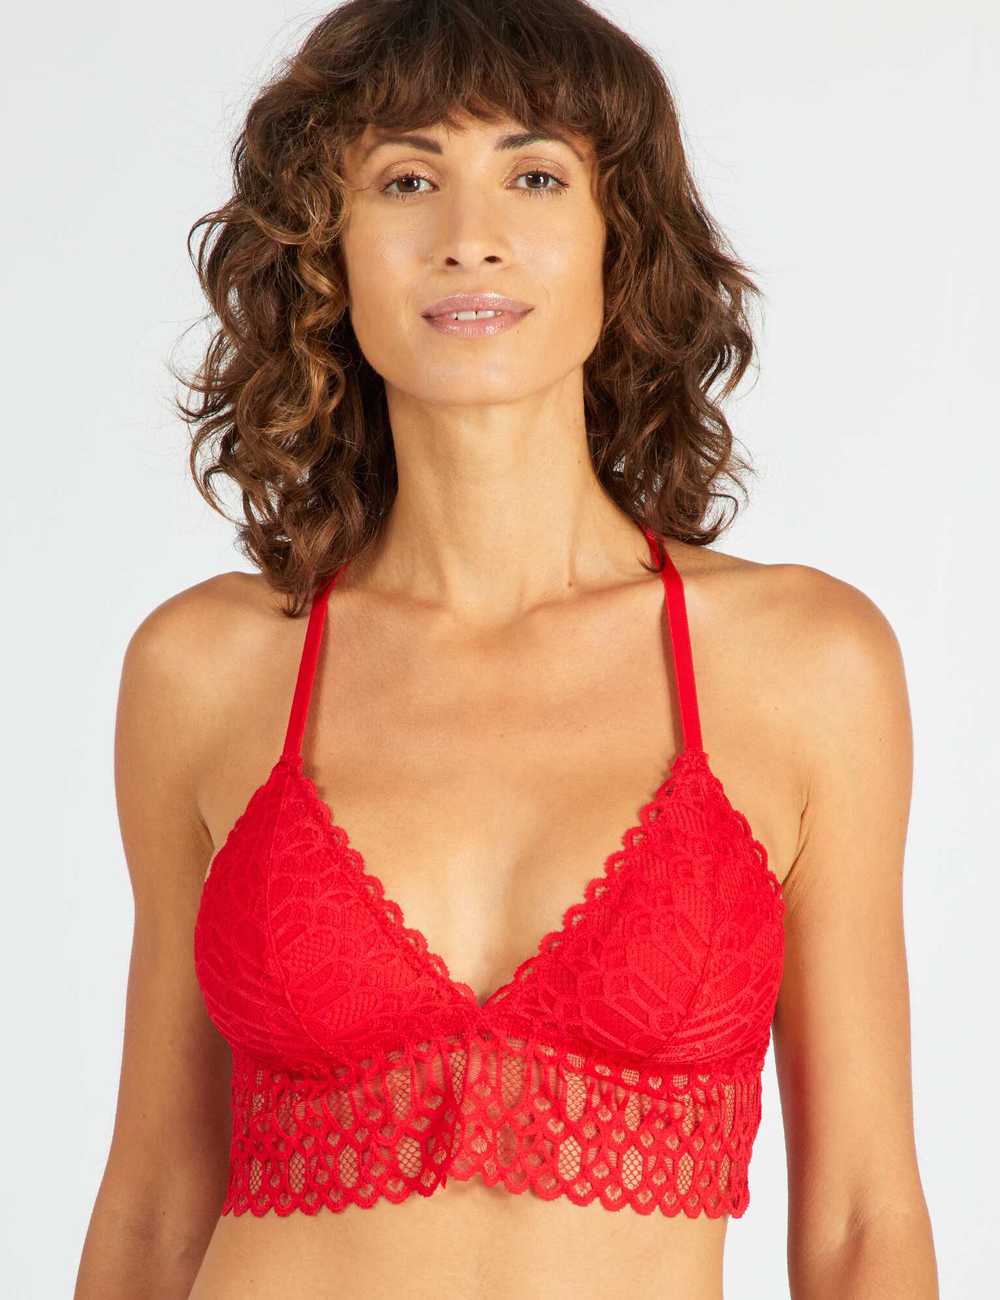 Buy Lace triangle bra with decorative jewel detail Online in Dubai